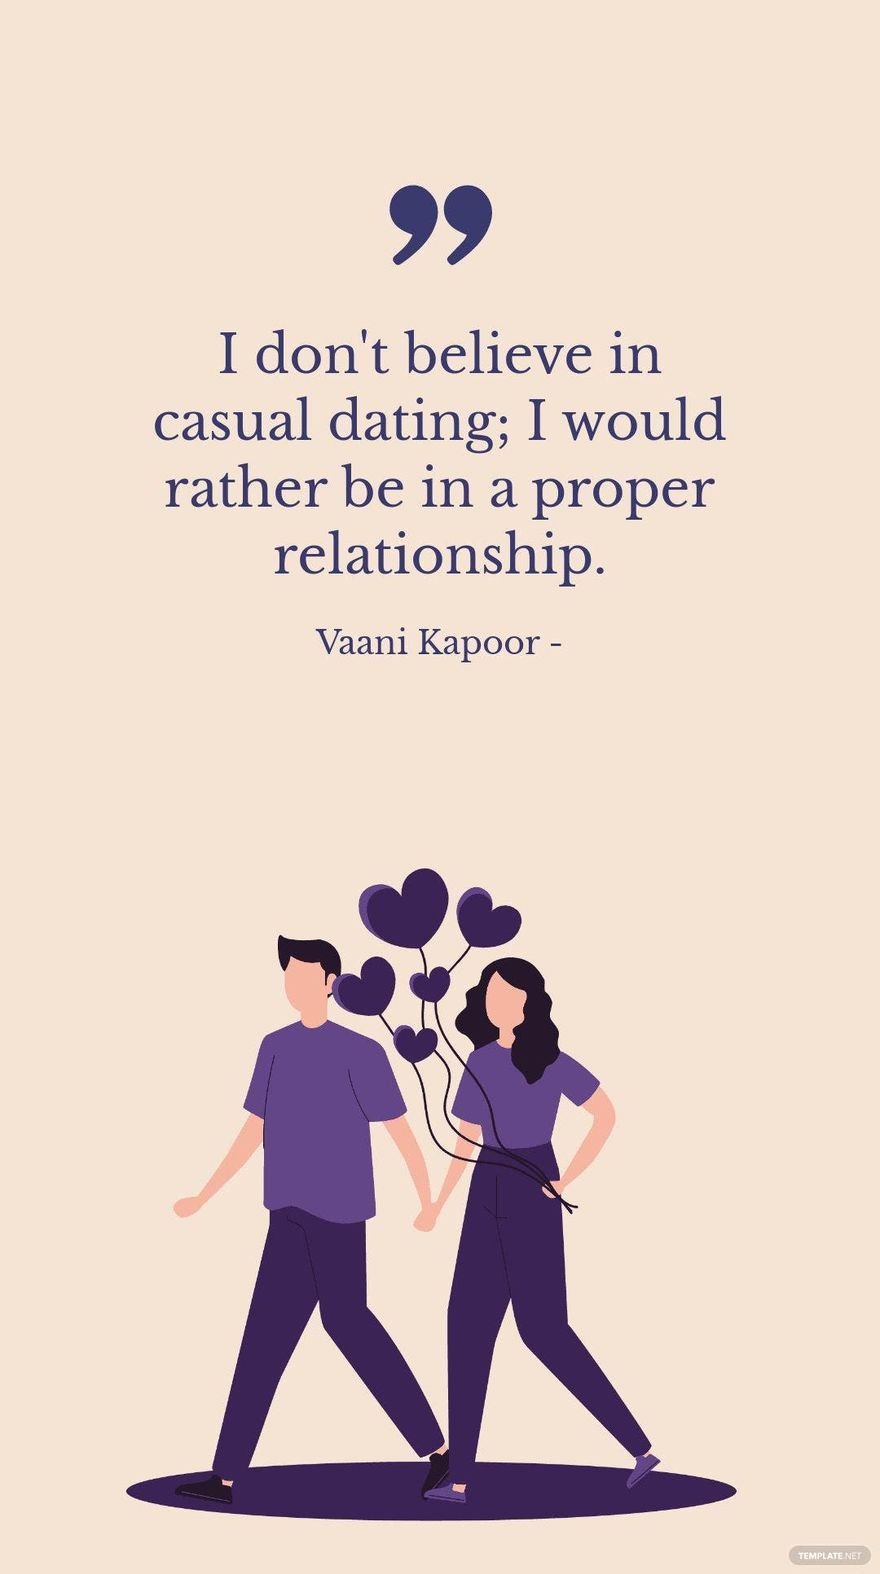 Vaani Kapoor - I don't believe in casual dating; I would rather be in a proper relationship.